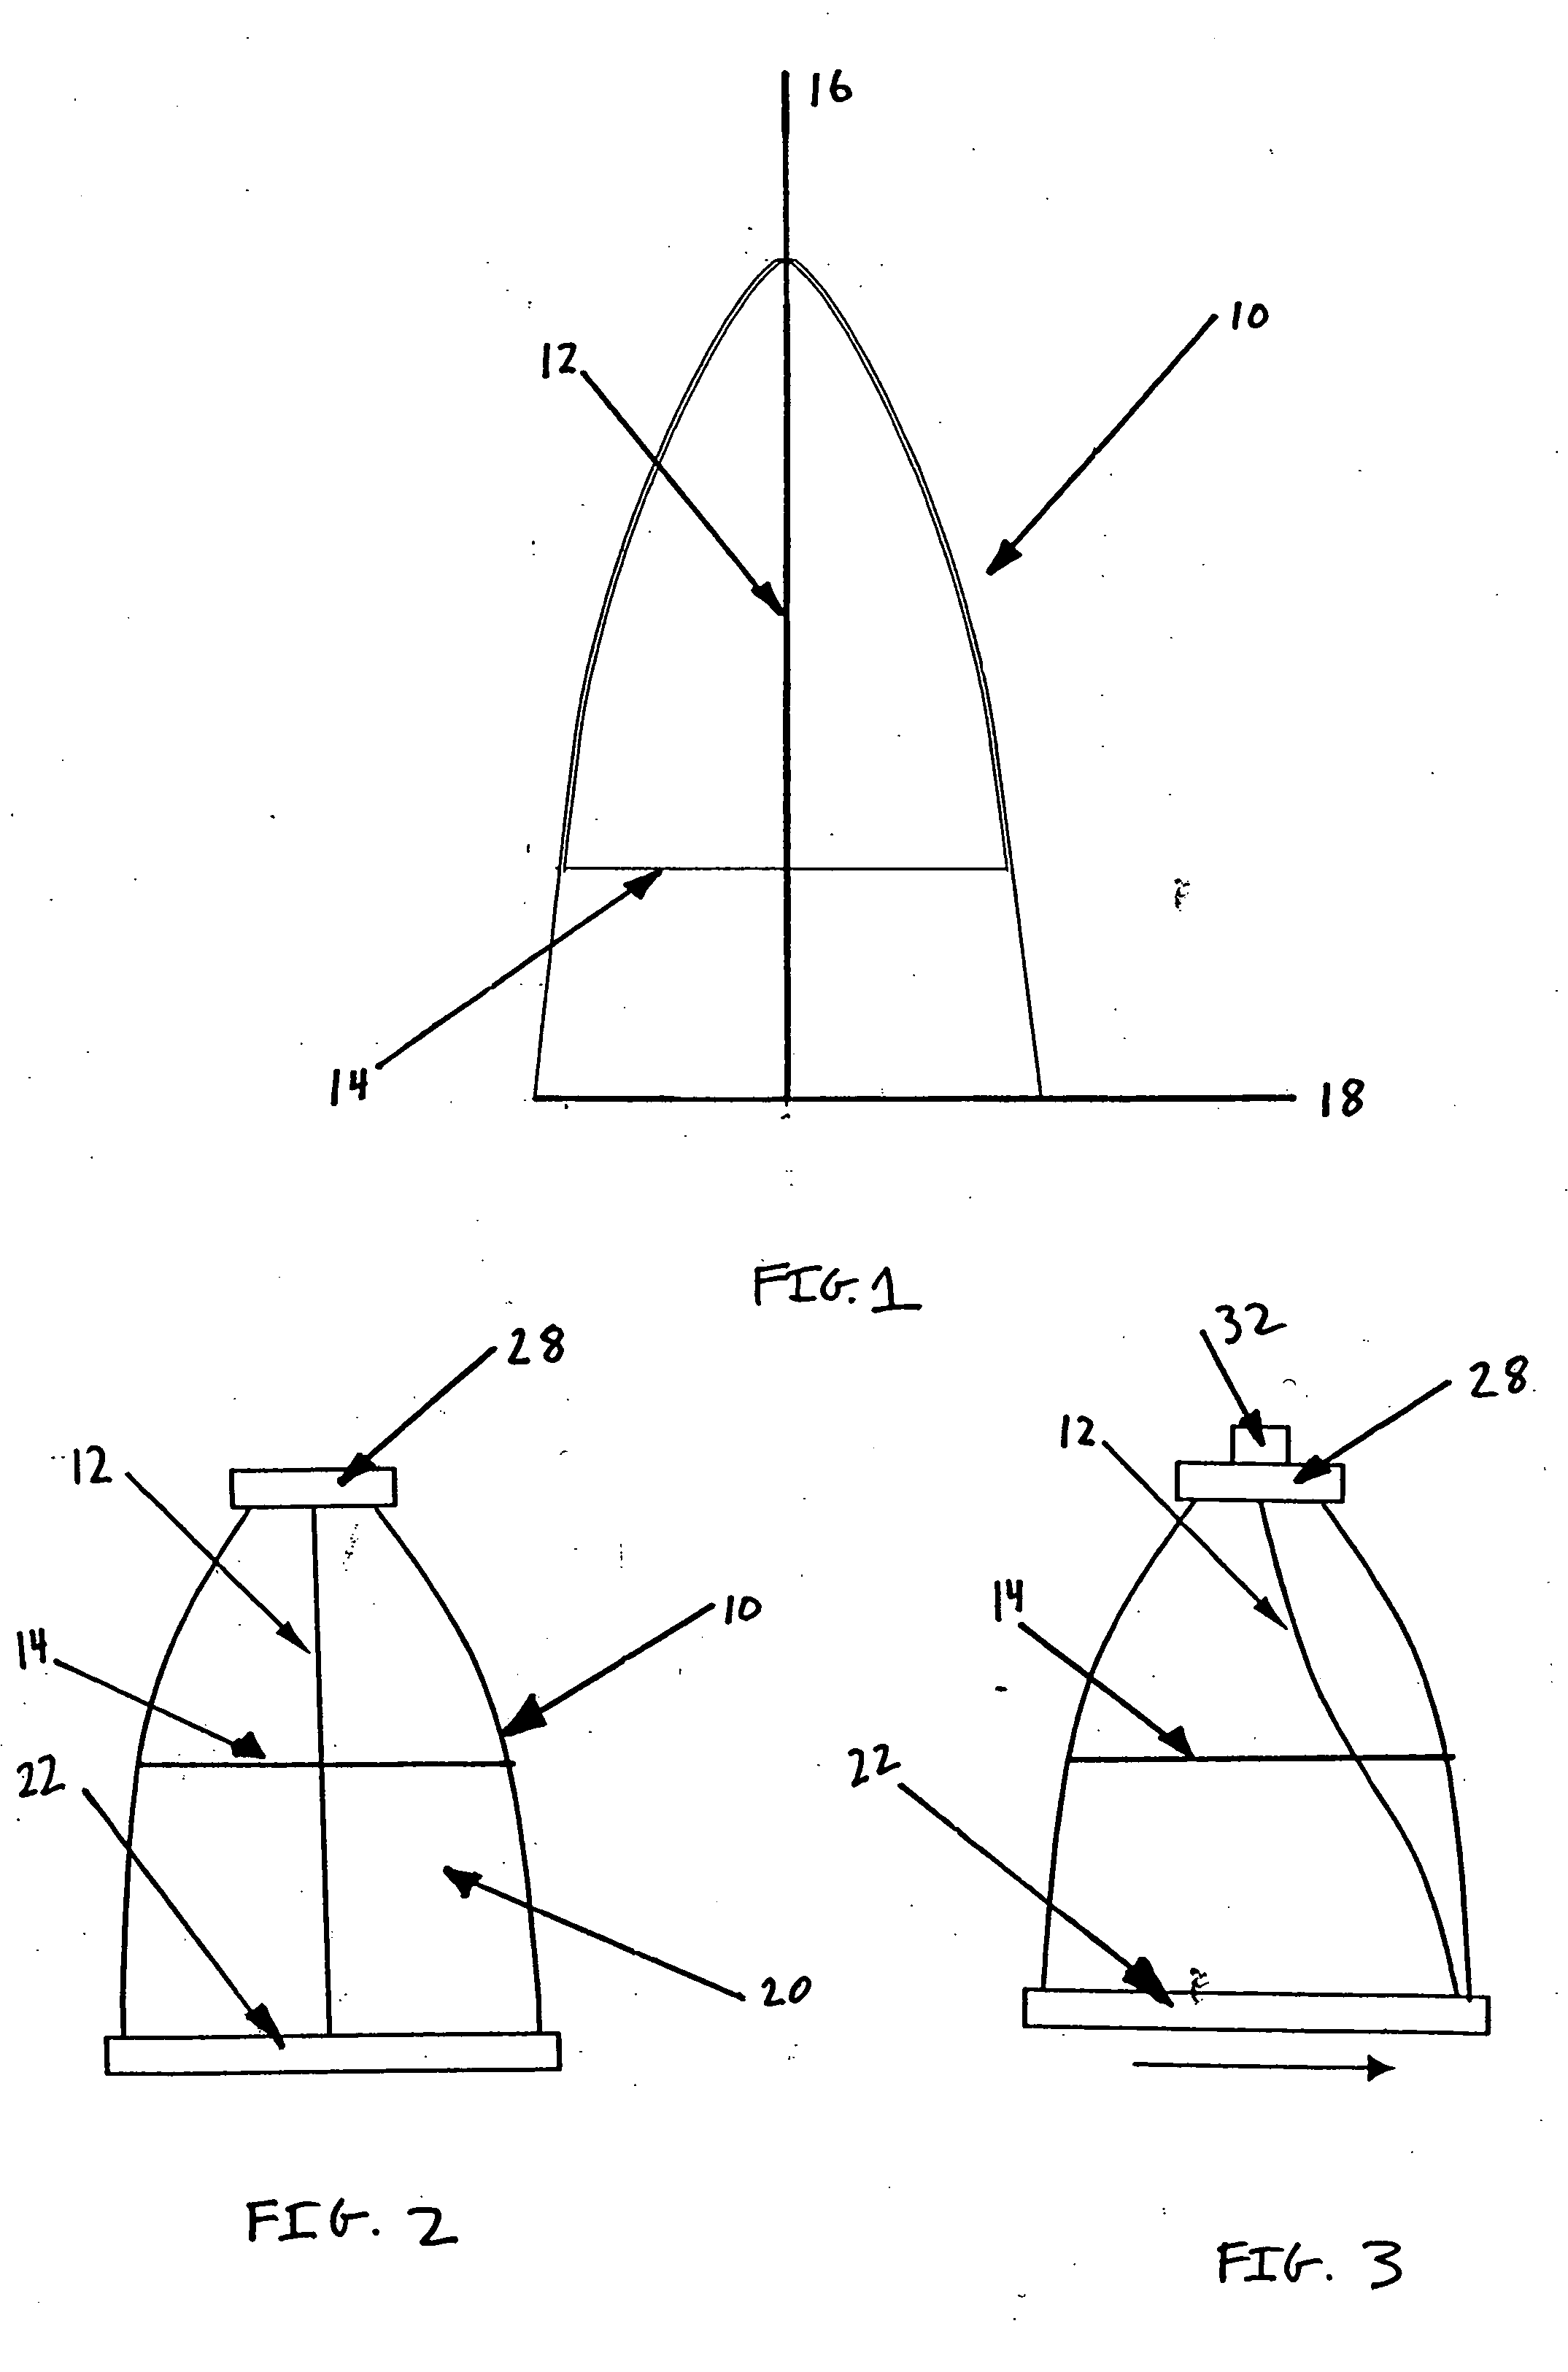 Fabricating symmetric and asymmetric shapes with off-axis reinforcement from symmetric preforms